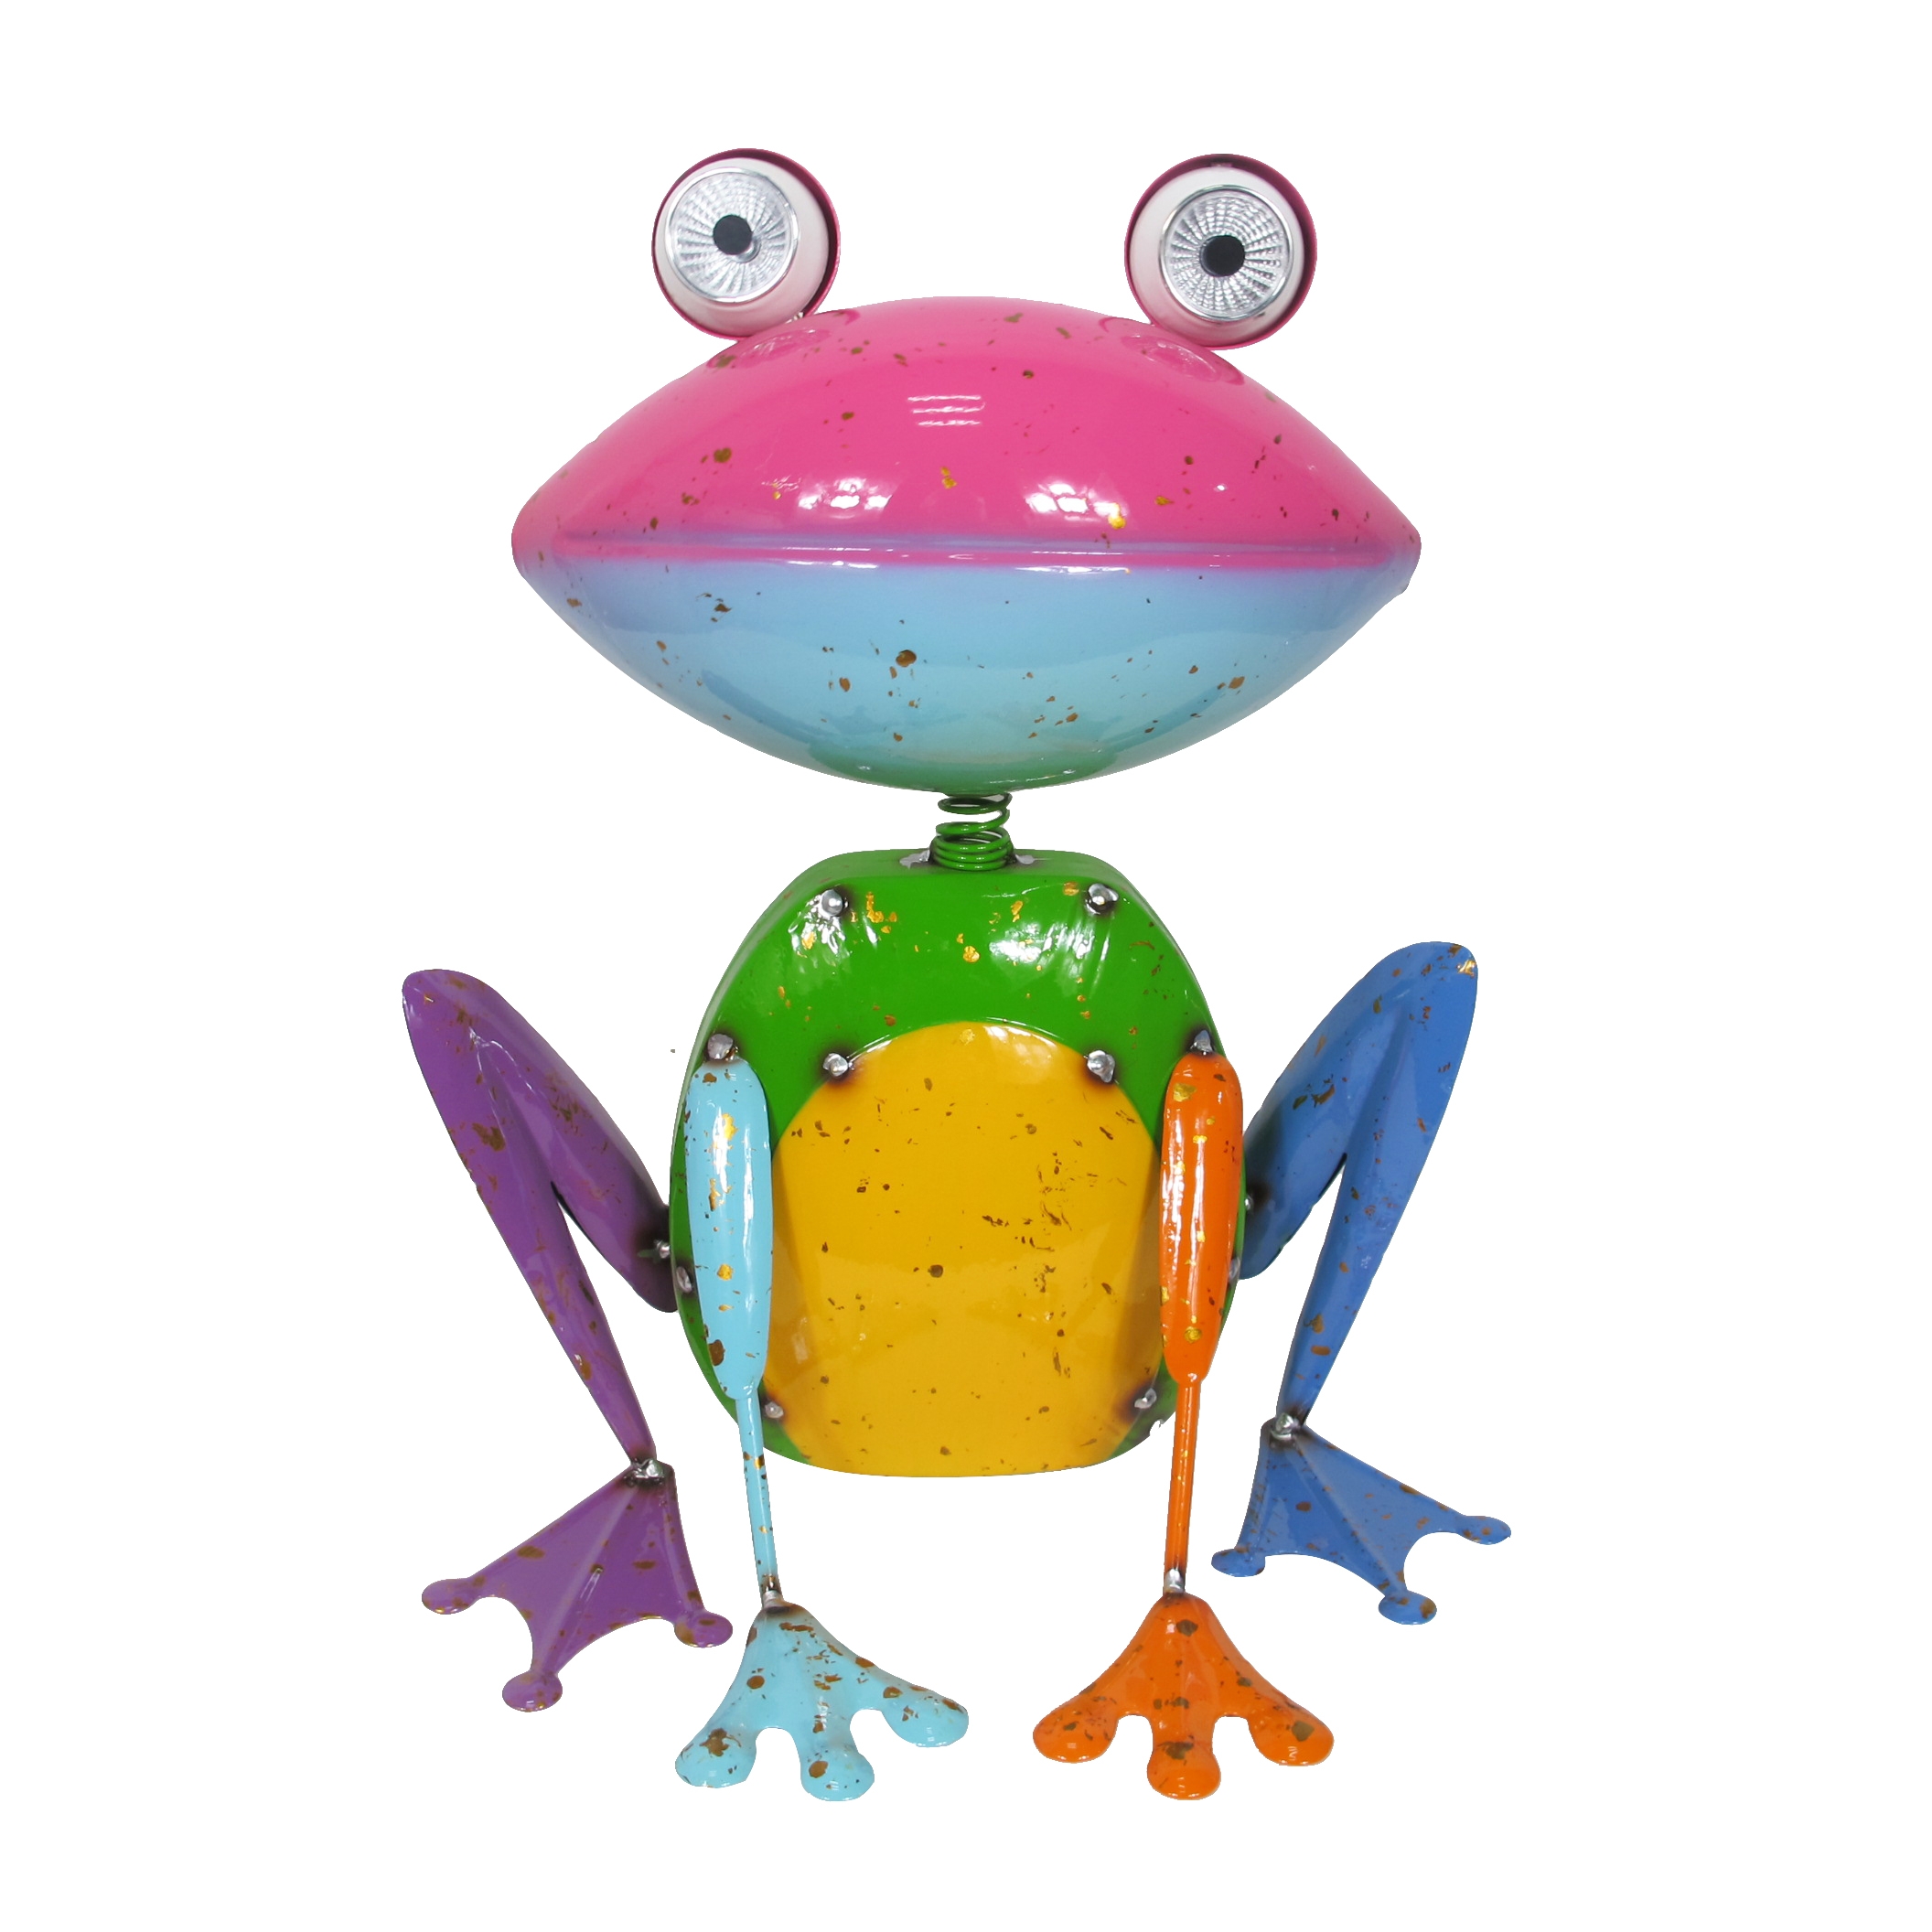 20707B // Metal frog Statue with Solar Lights - Pink Head